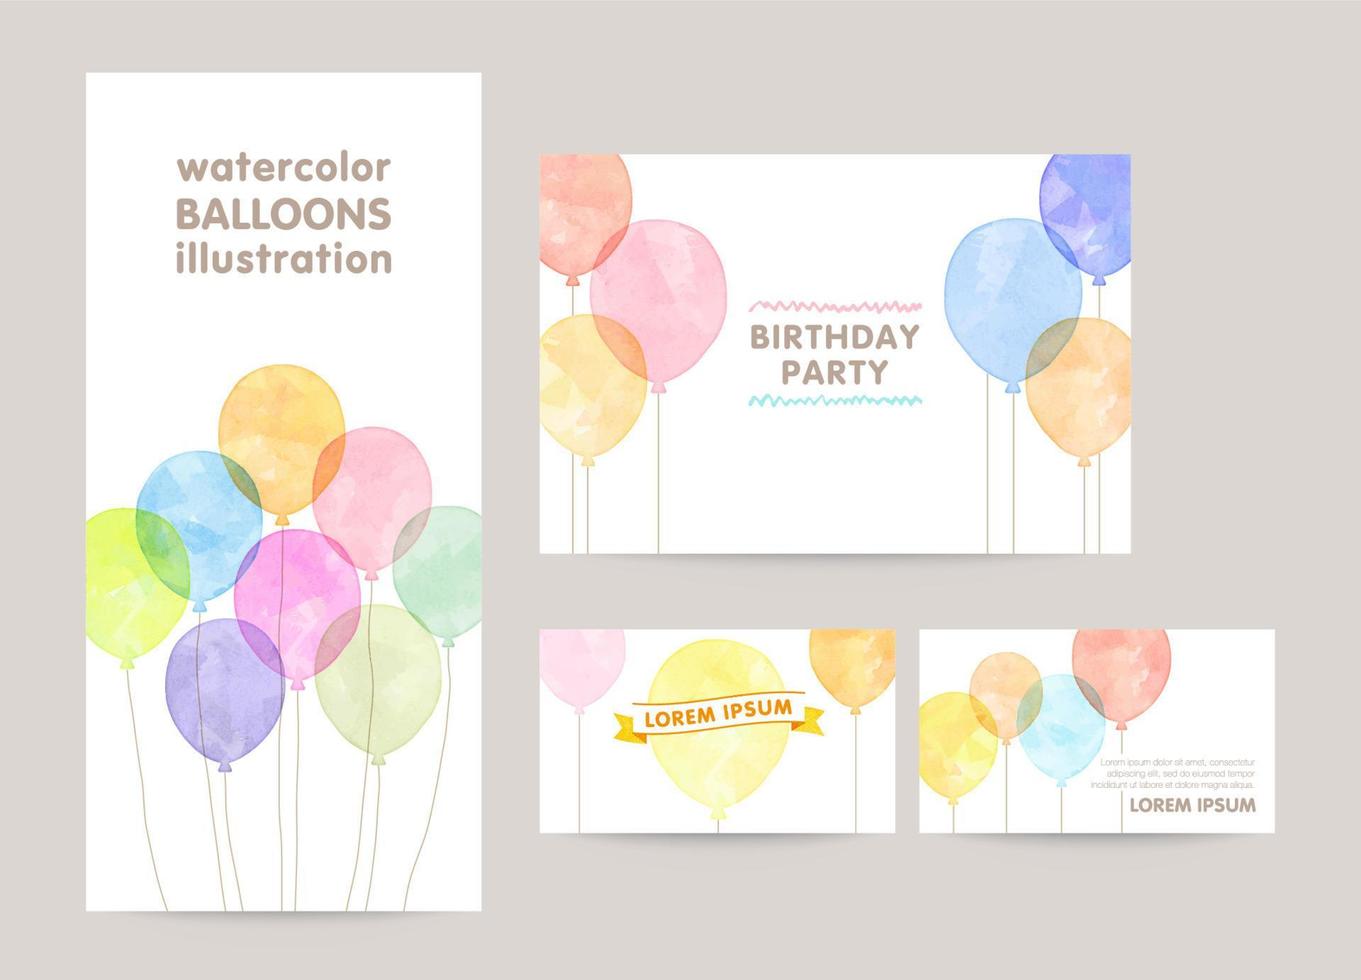 watercolor vector balloons illustration templates. leaflet cover, card, business cards, banner